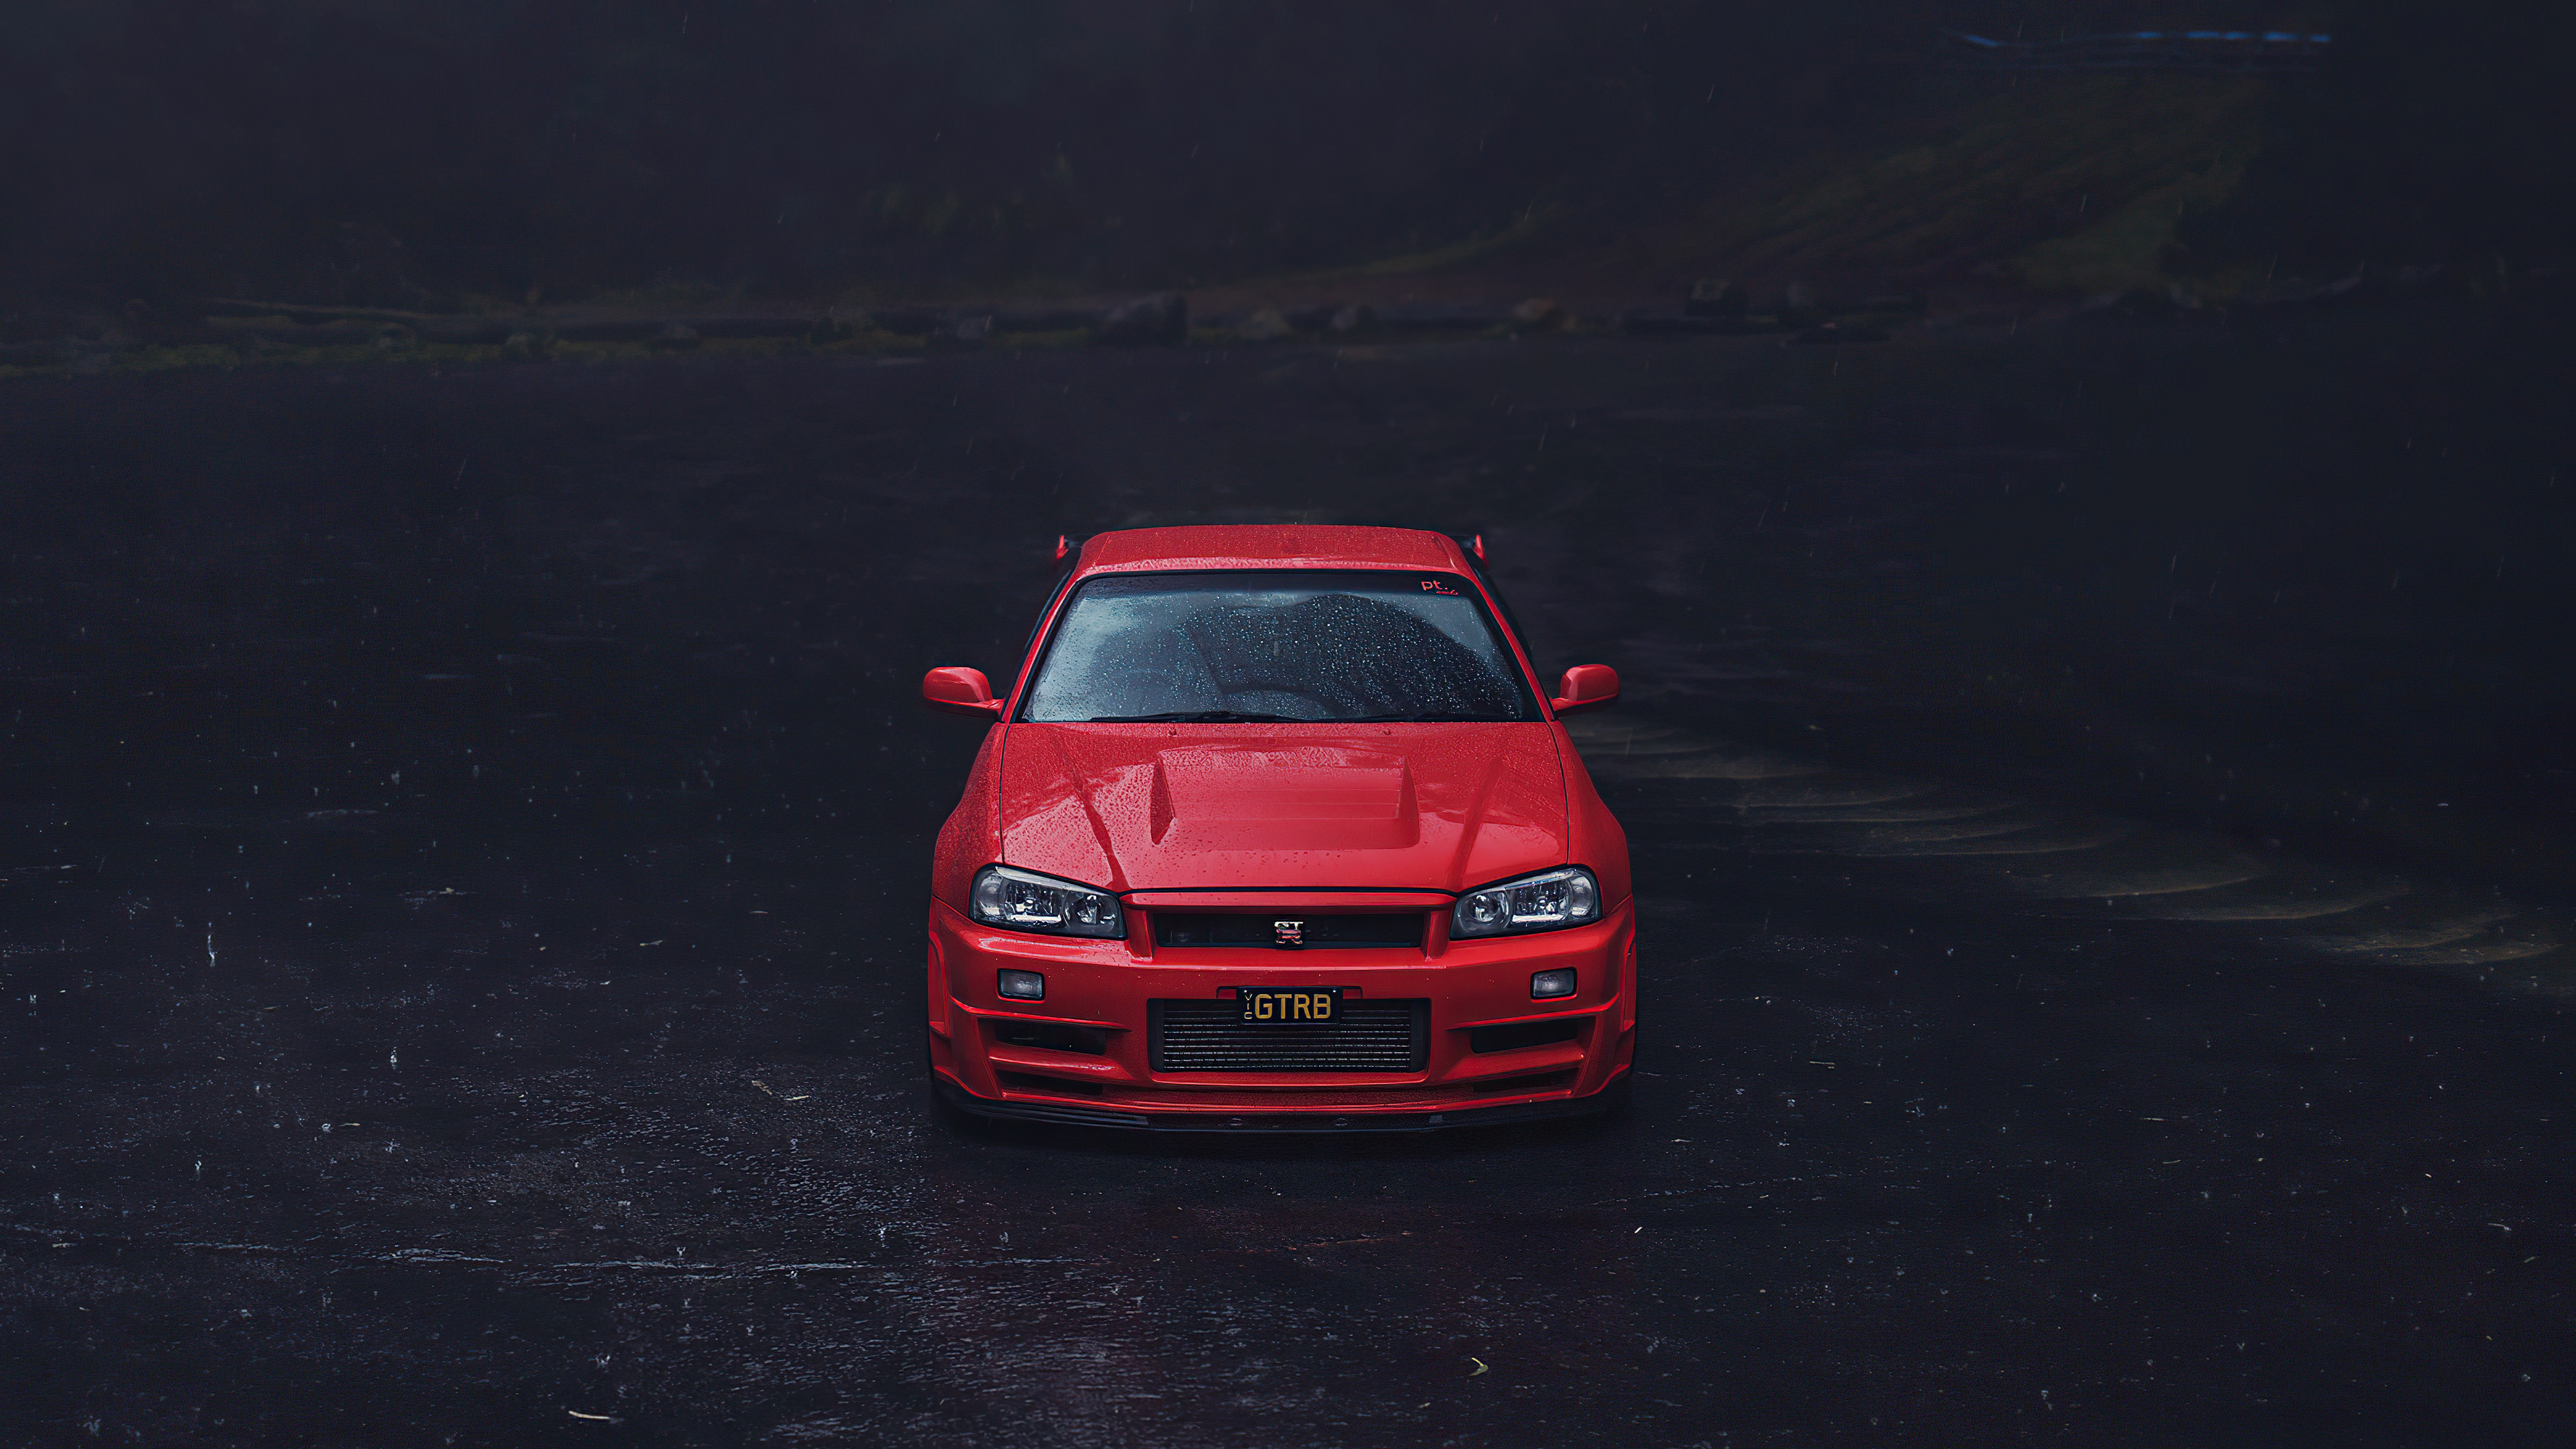 Nissan Skyline R34 Nissan Skyline Red Nissan Car Front Angle View Simple Background Minimalism 5120x2880